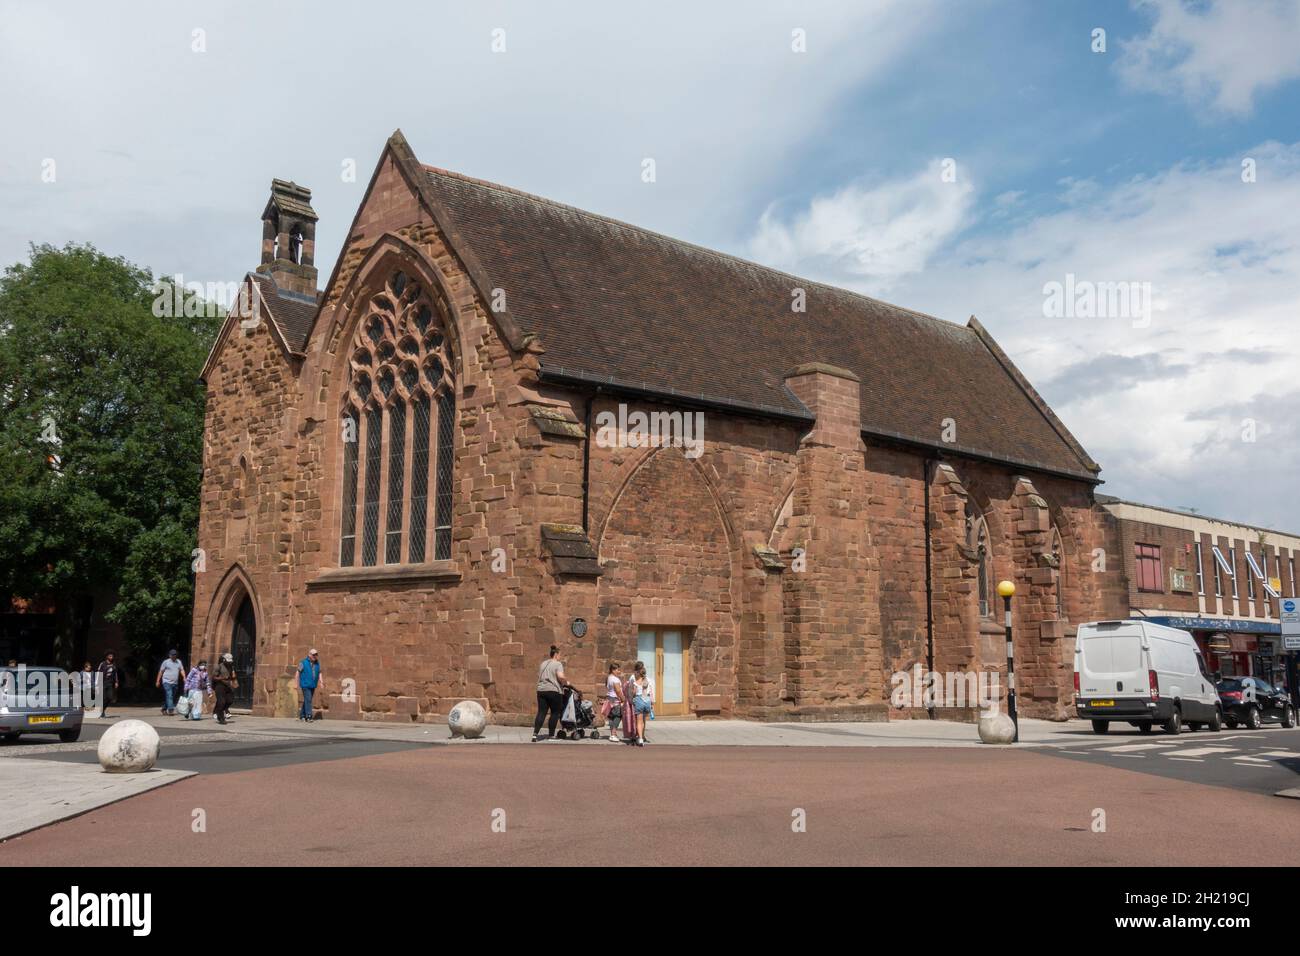 The Old Grammar School, Coventry is a Grade I listed building, Coventry, West Midlands, UK. Stock Photo